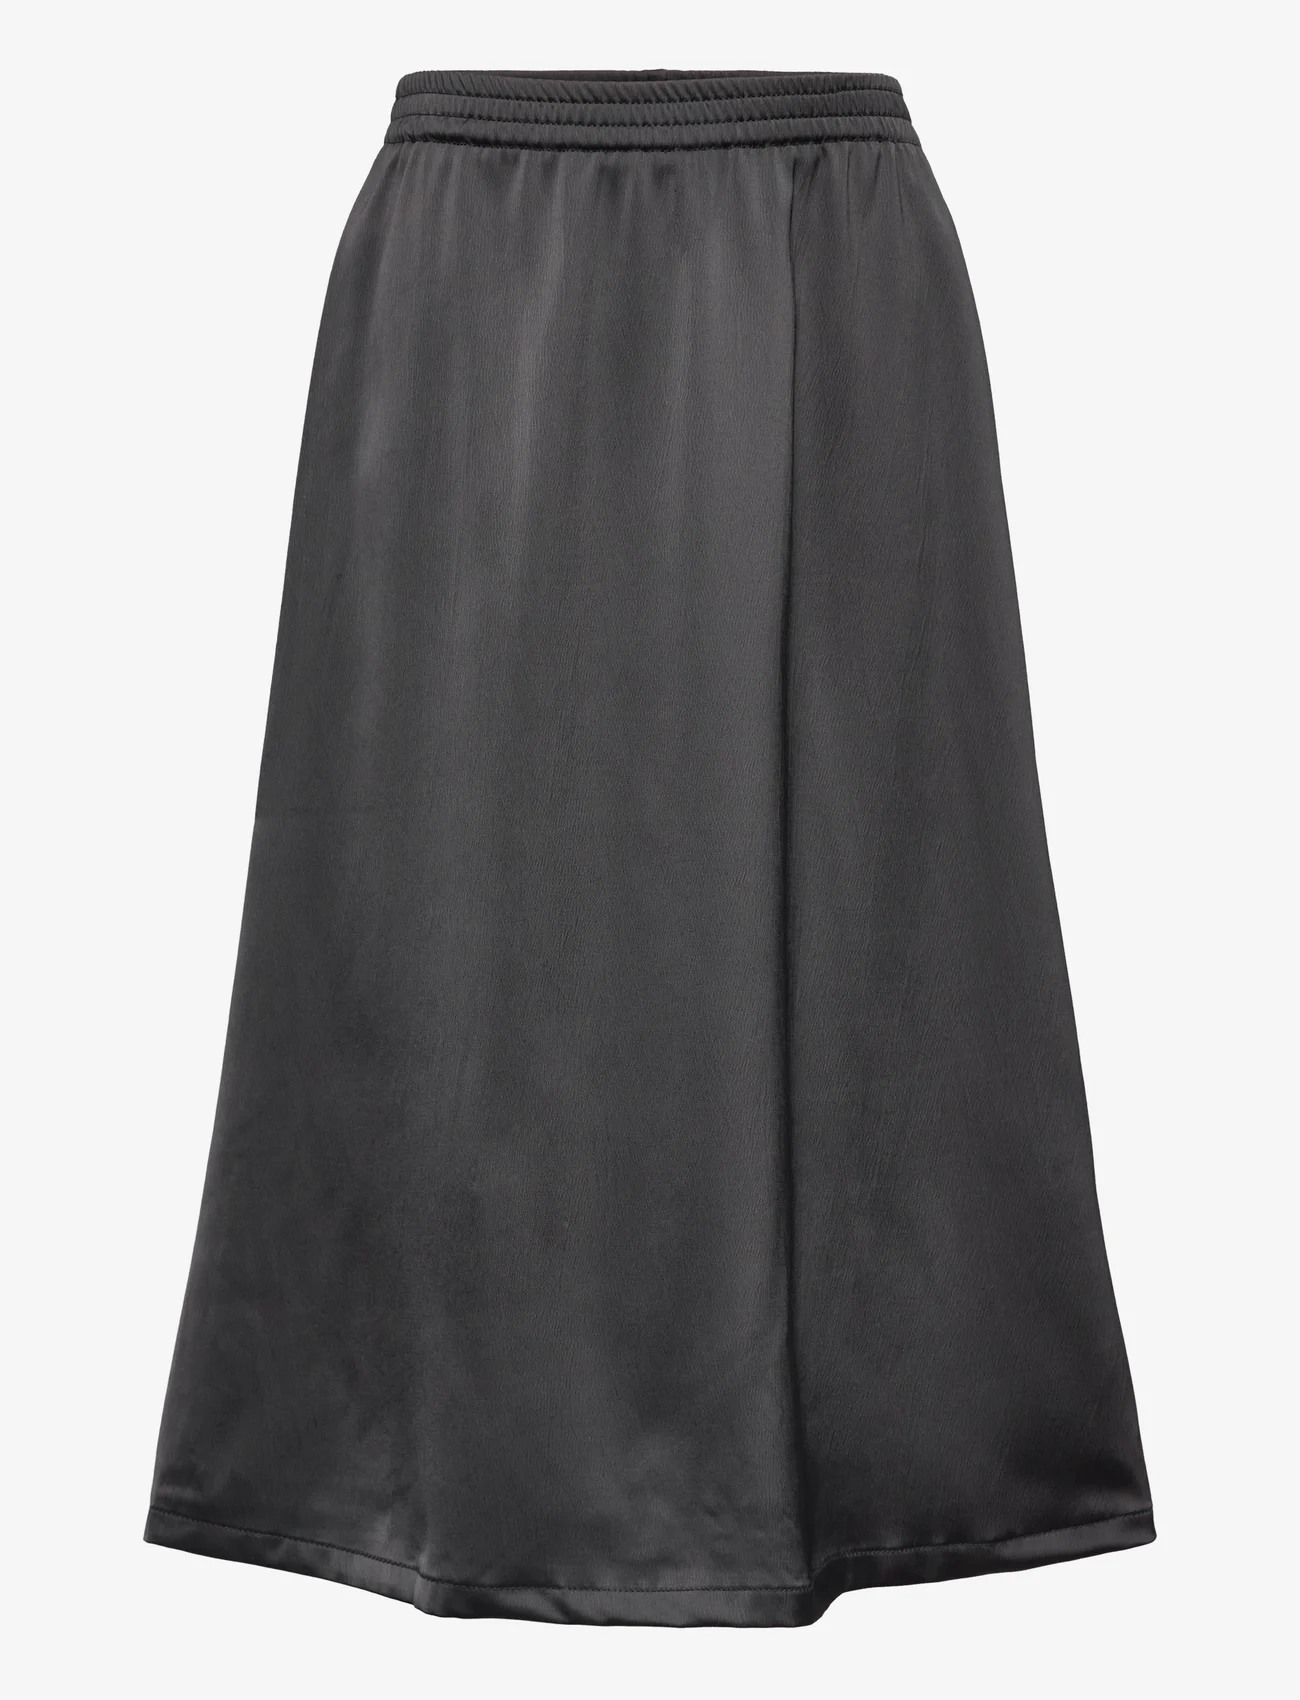 Sofie Schnoor Young - Skirt - maxi skirts - black - 0